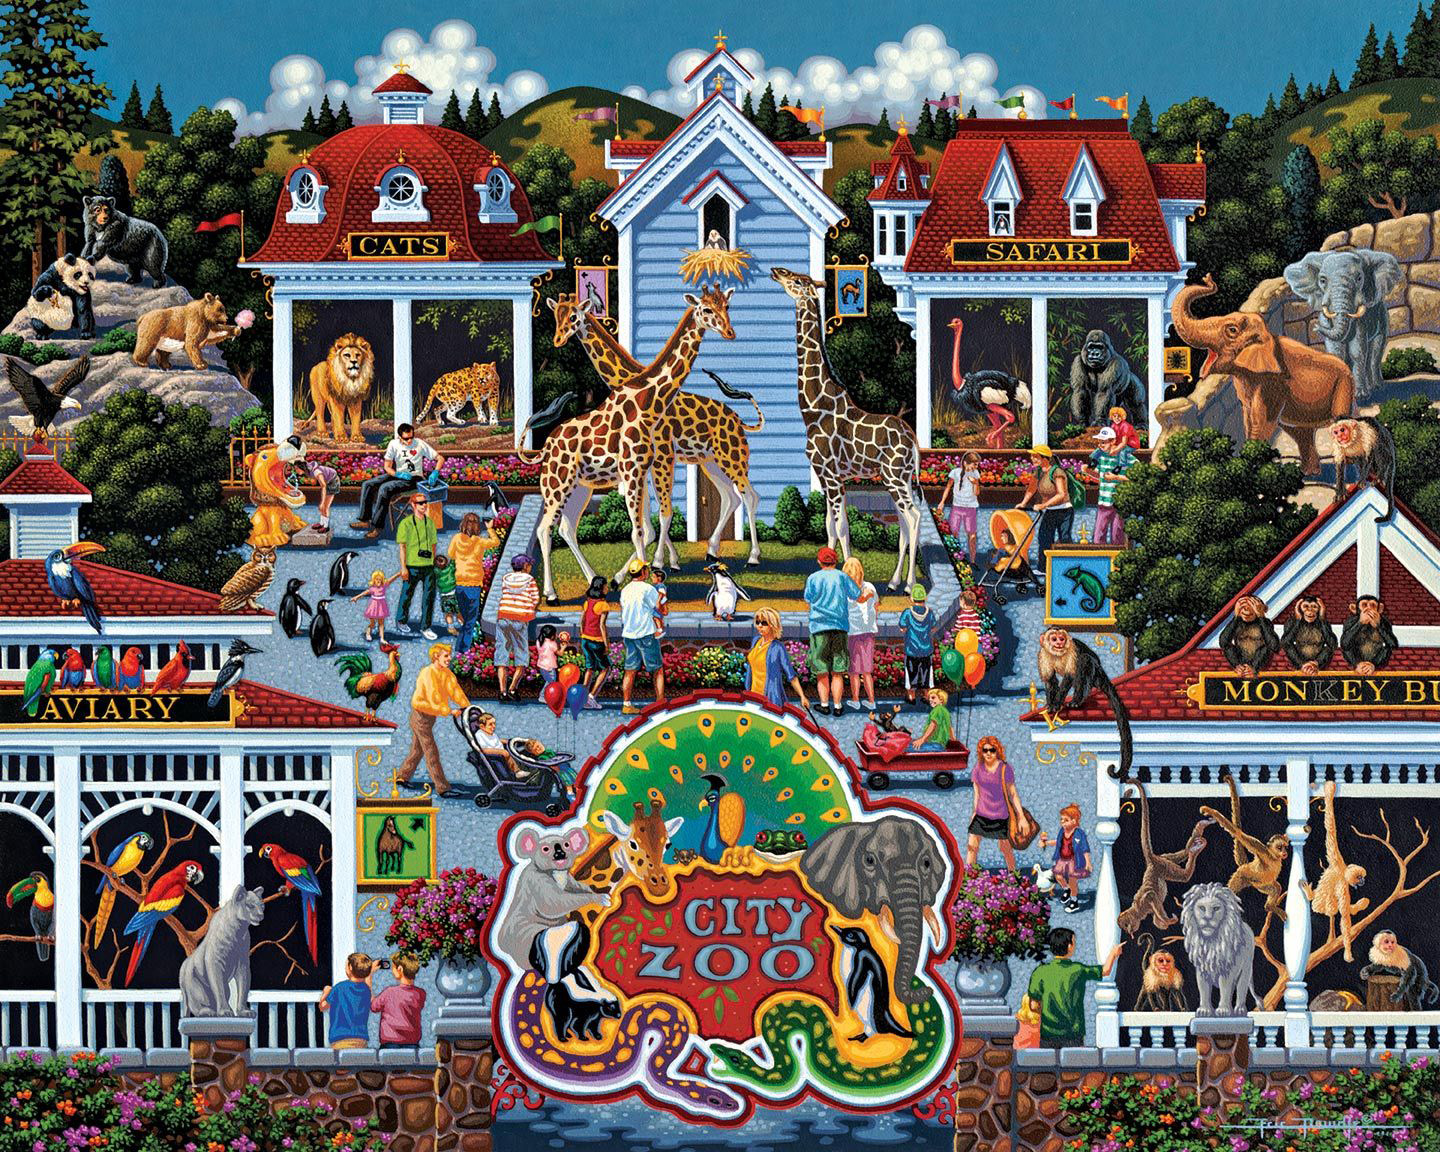 Day at the Zoo Animals Jigsaw Puzzle